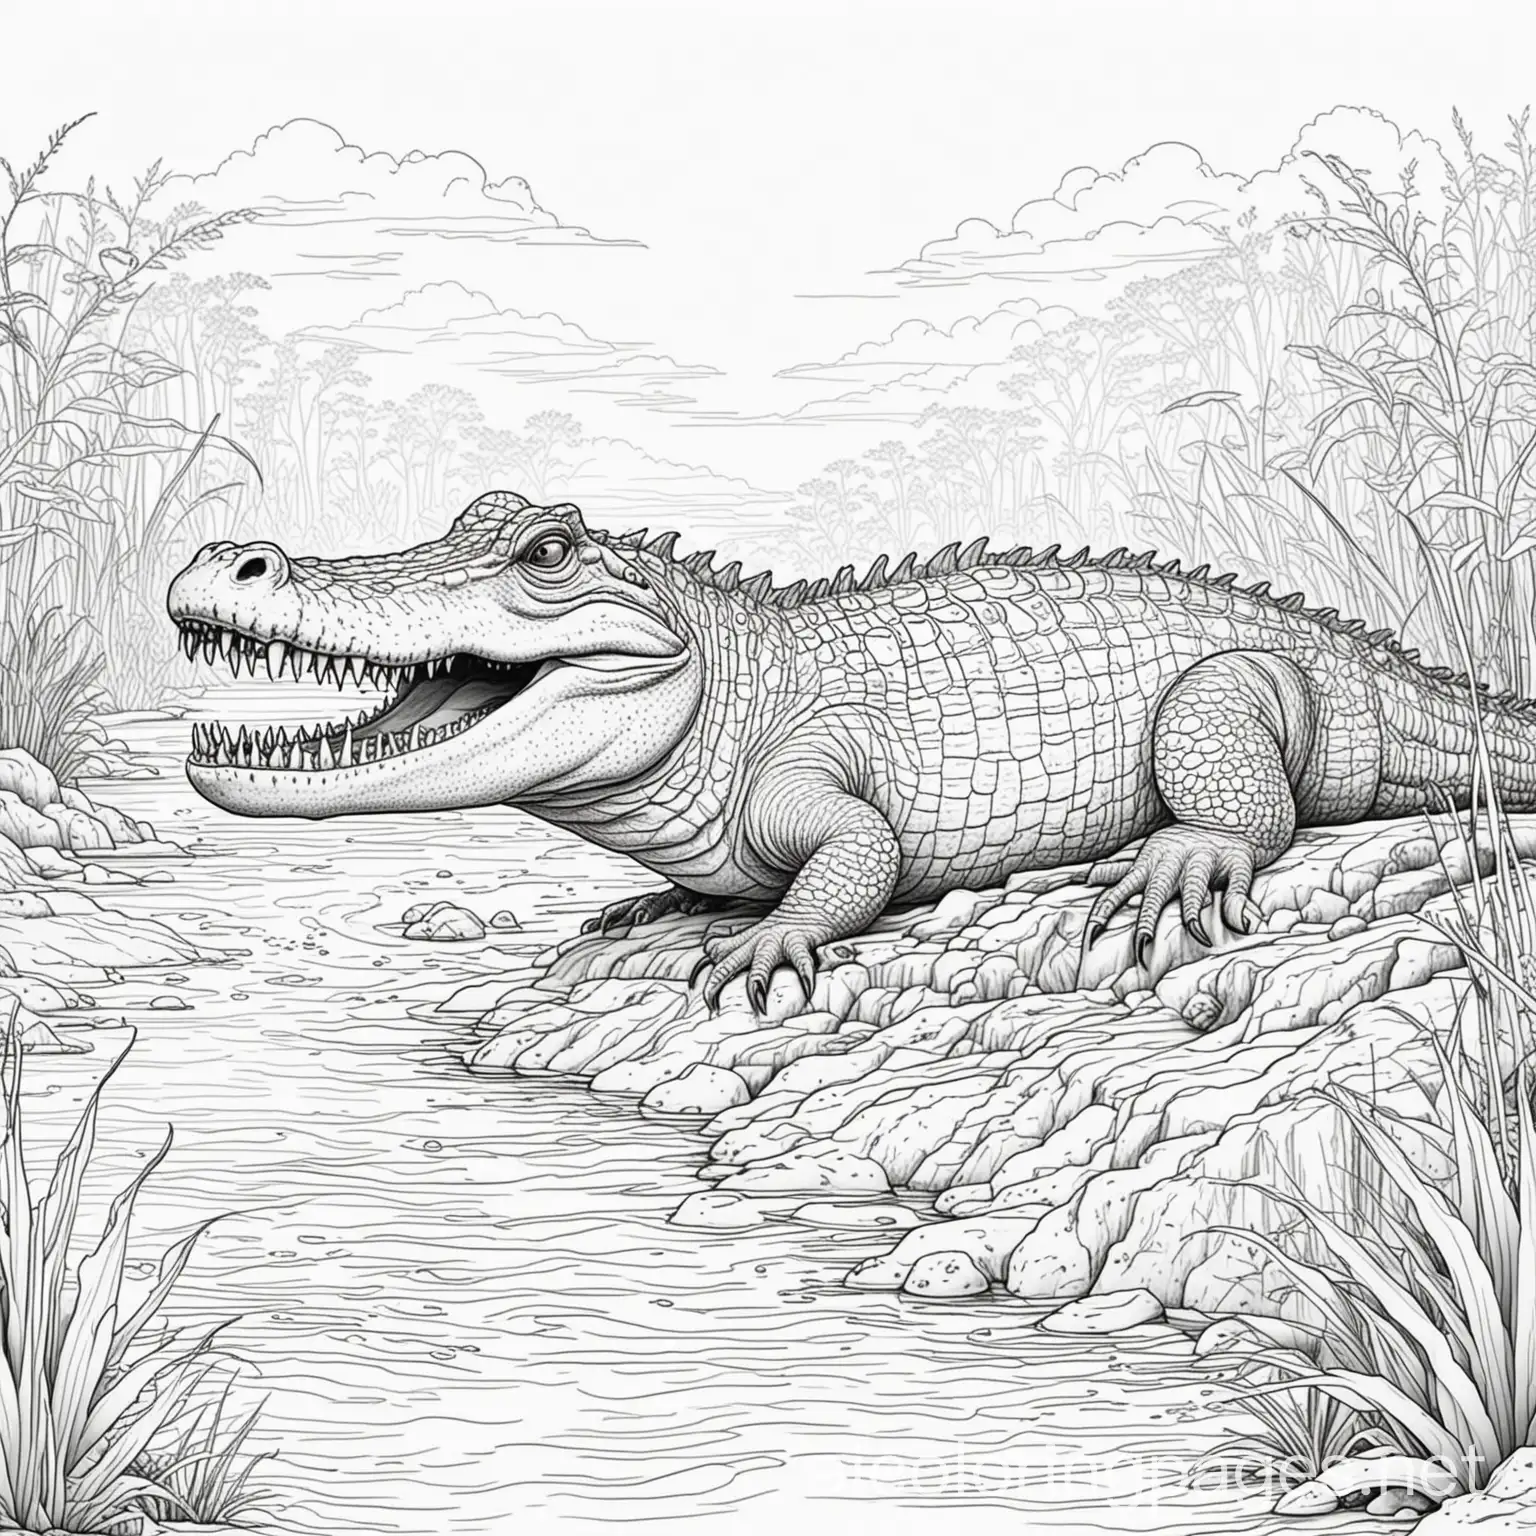 Friendly-Crocodile-in-Savannah-River-Coloring-Page-for-Children